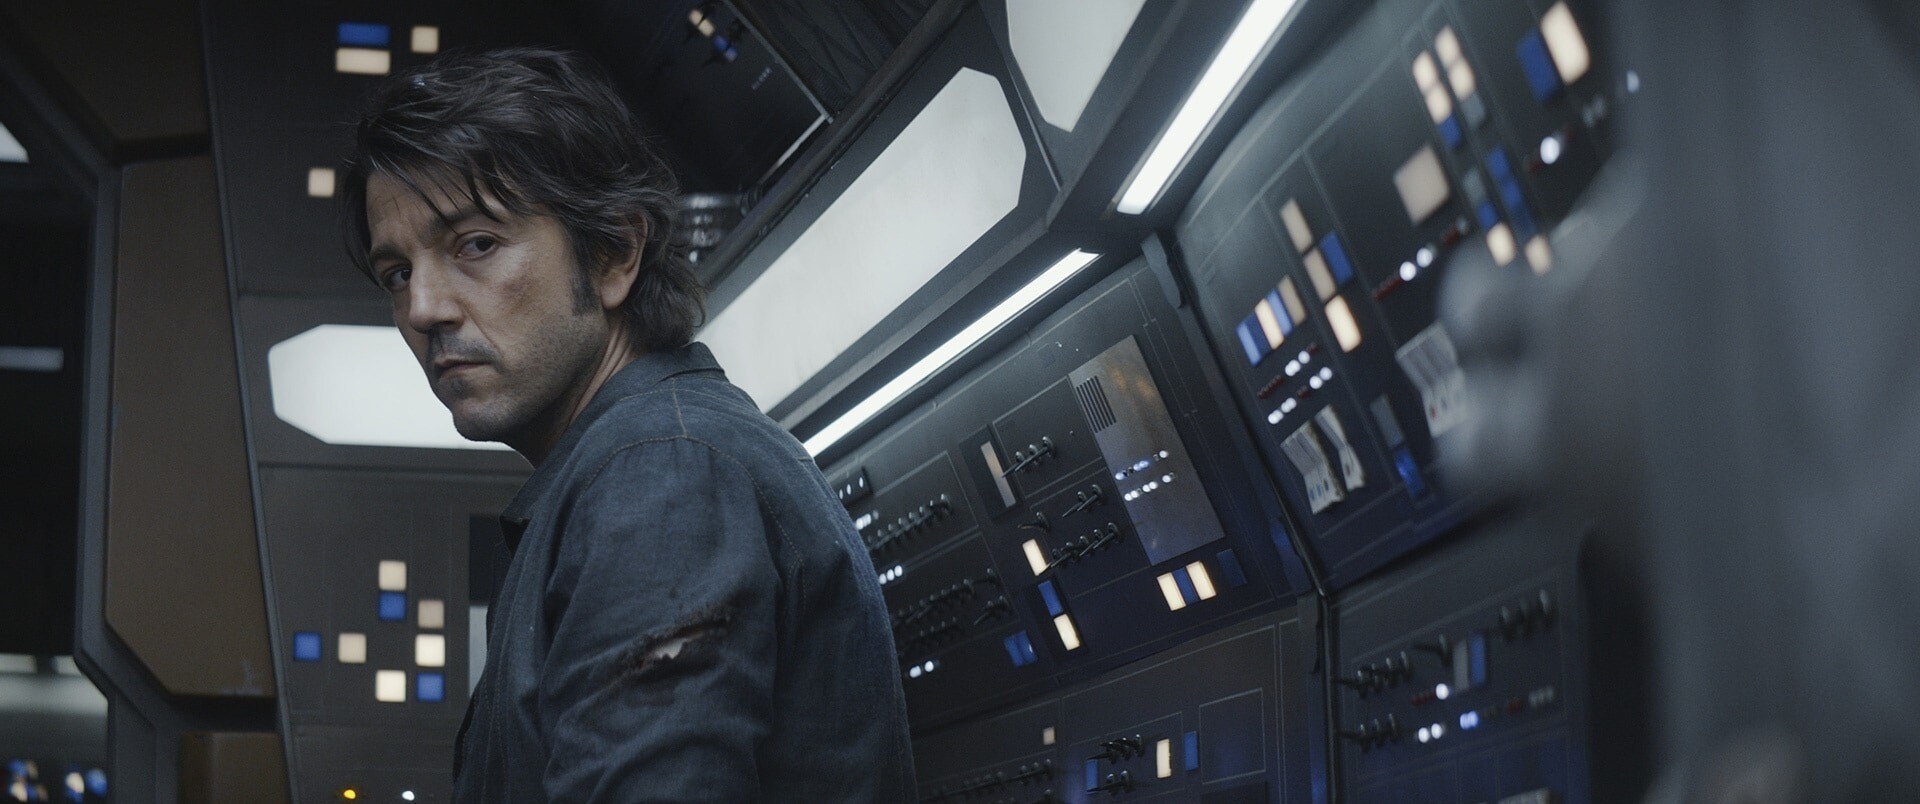 Cassian Andor - Star Wars: Rogue One - Rebel Forces